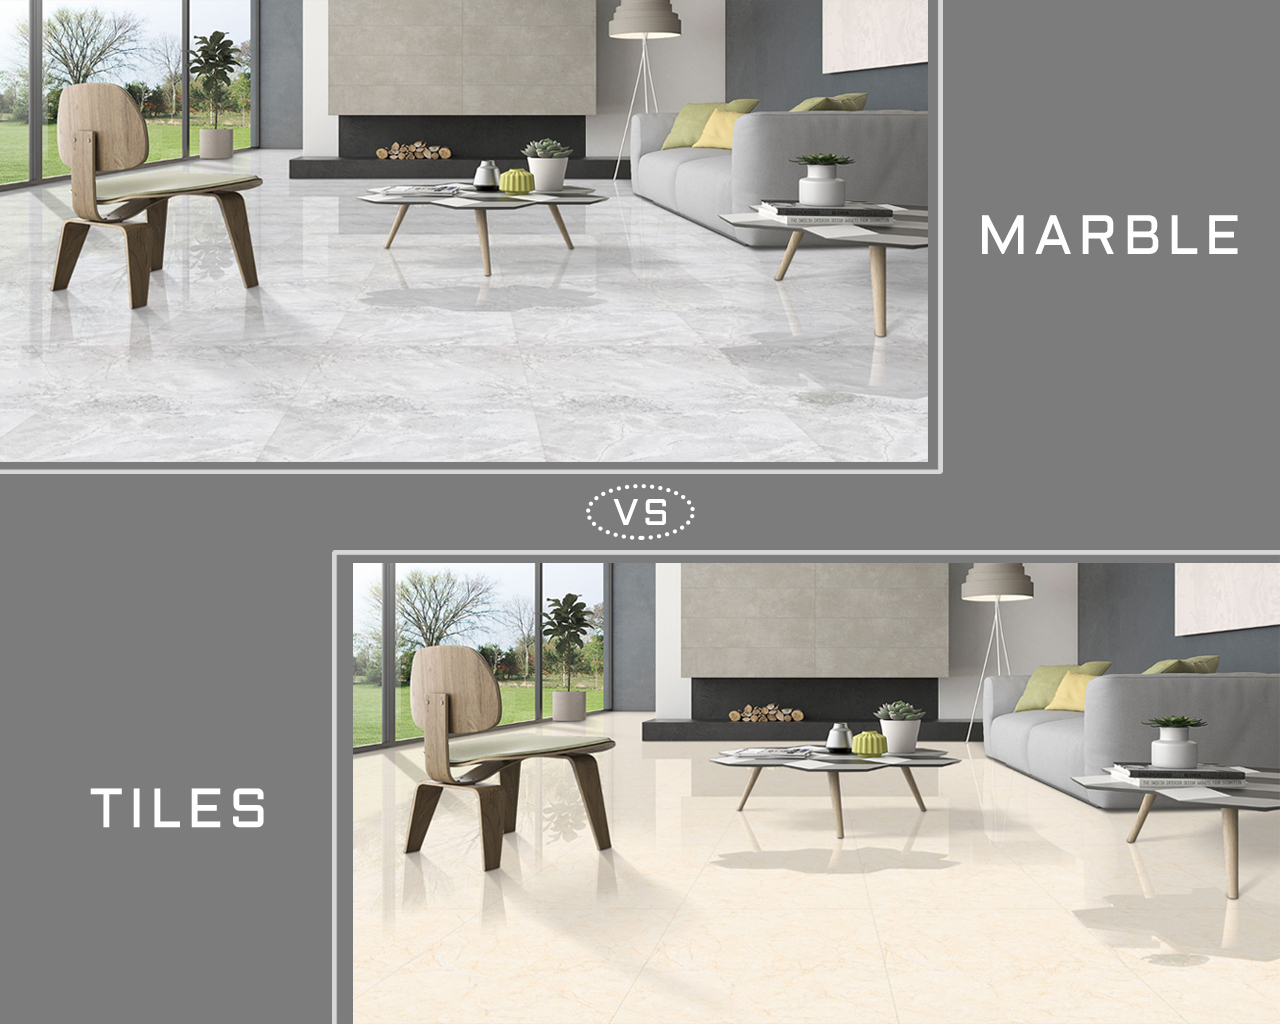 Marble Floor vs. Tile Floor: Which Is the Better Choice?